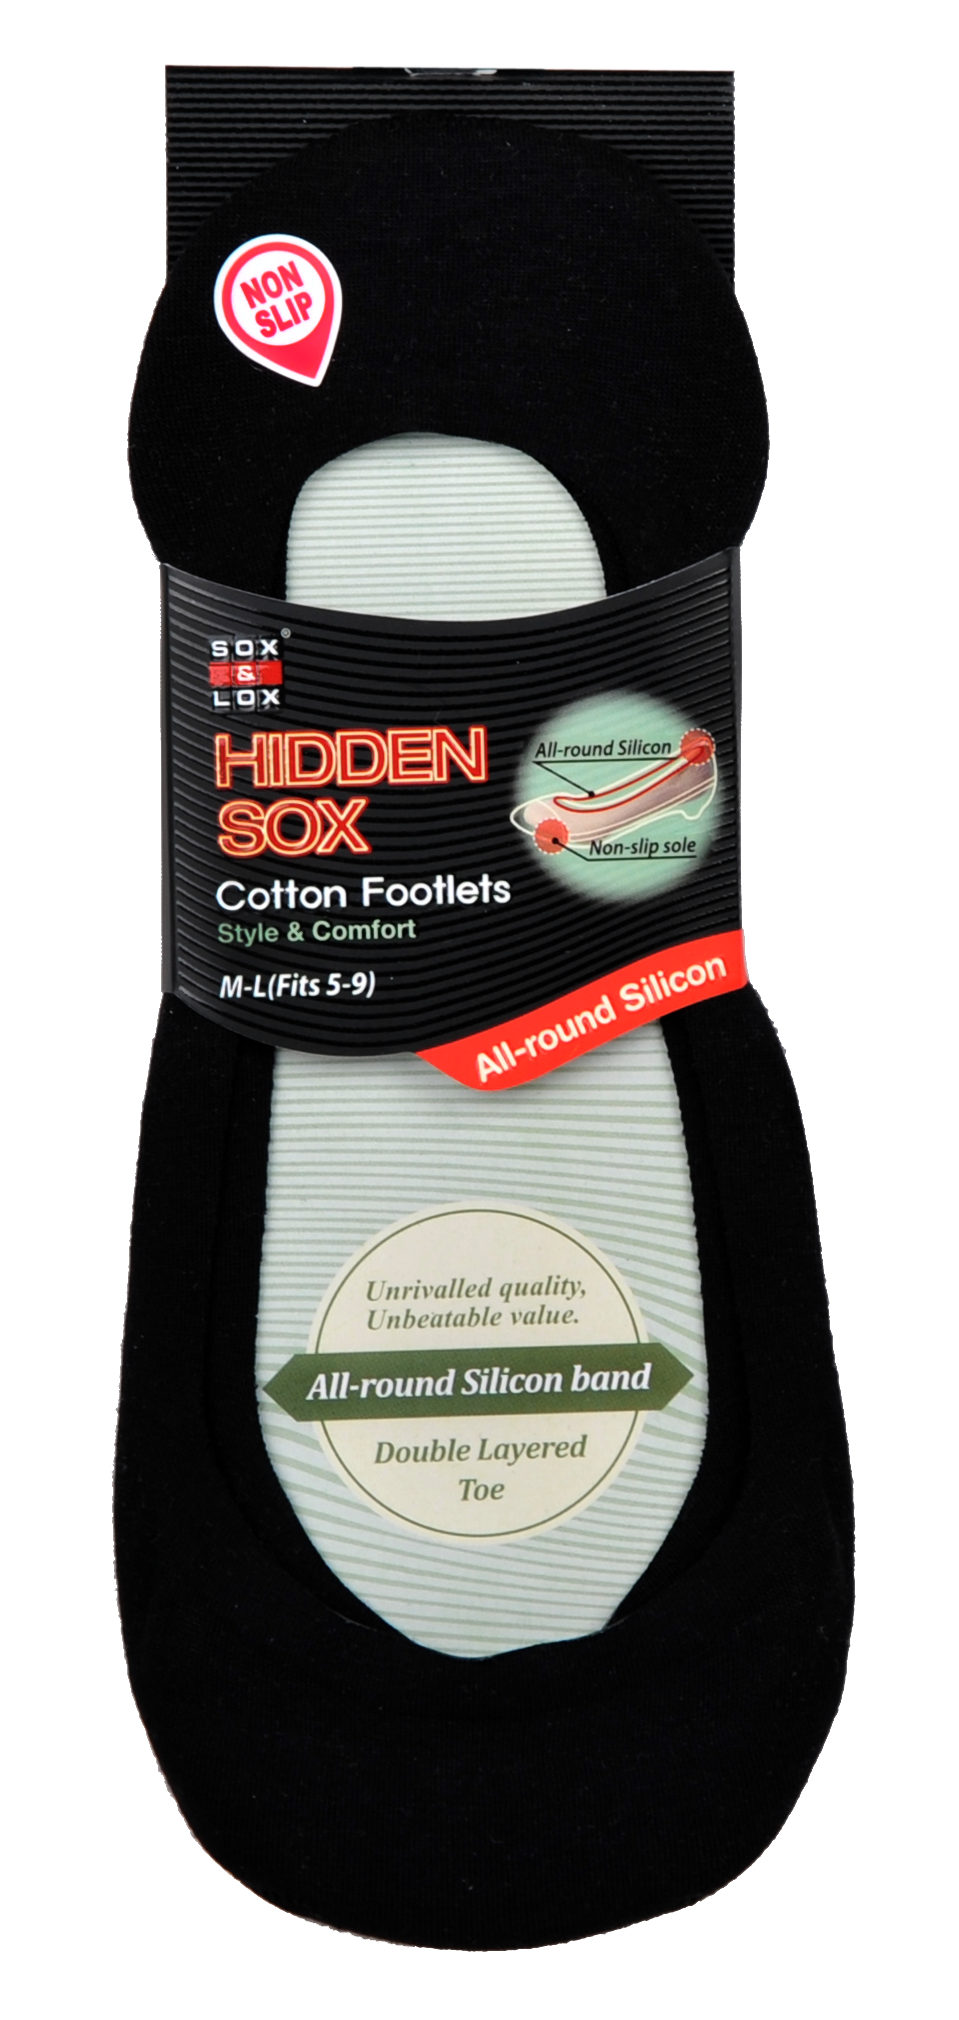 Women's Black Colour Low Hidden Socks With Silicon Band stay hidden below the shoe-line